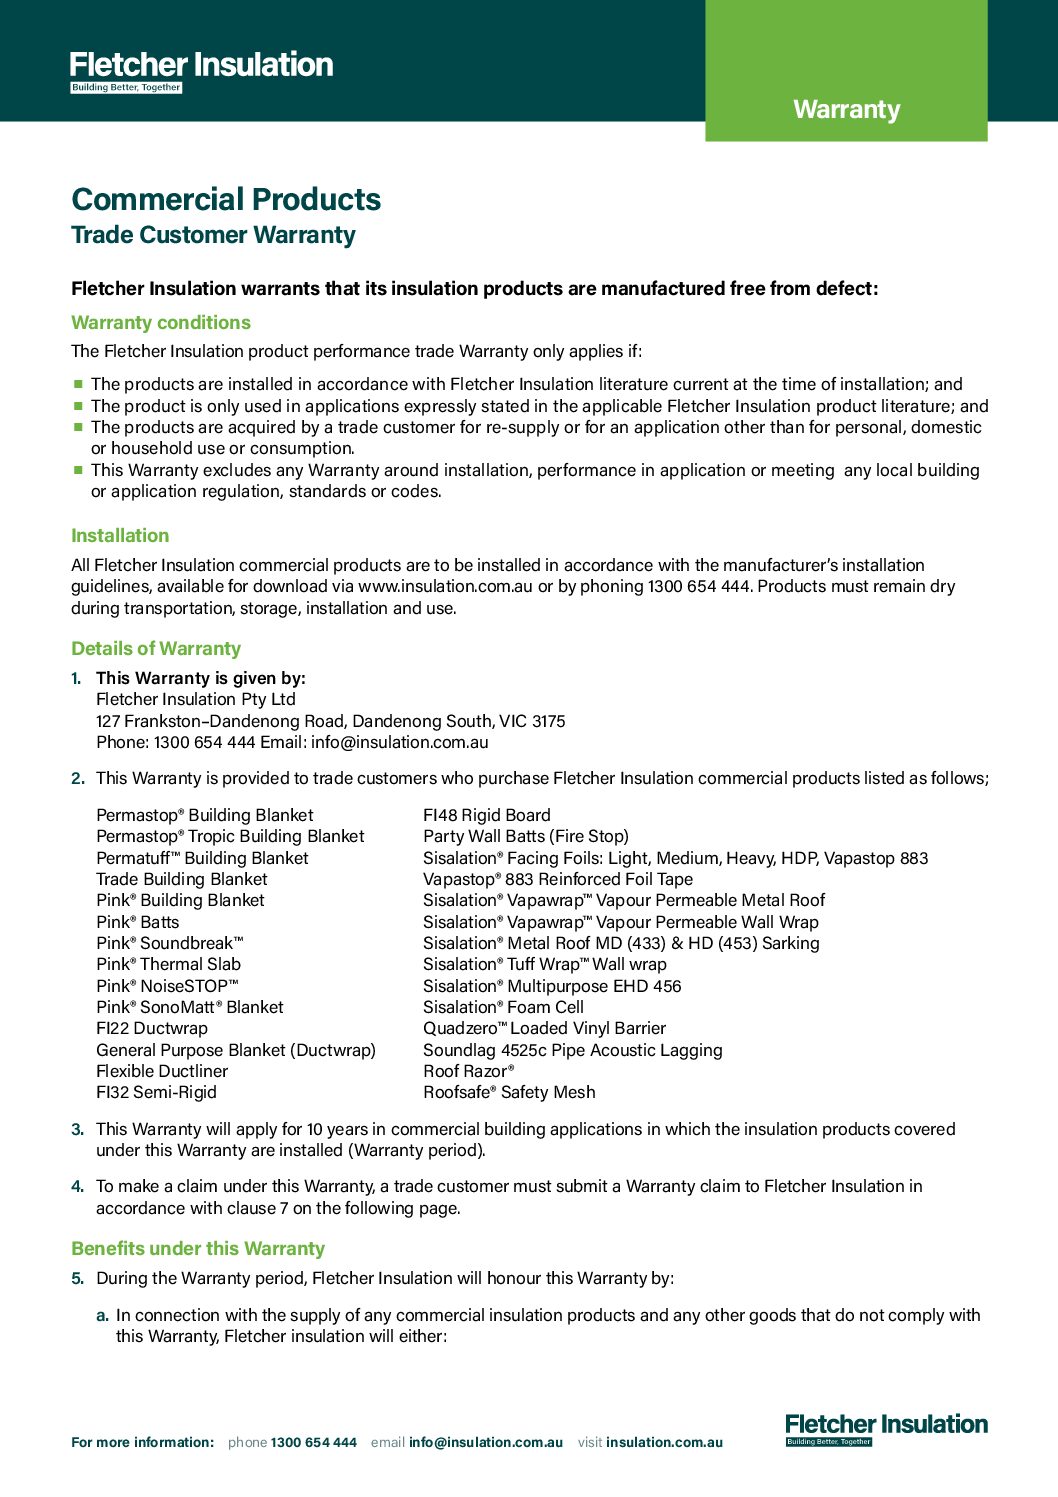 Commercial Products – Trade Customer Warranty